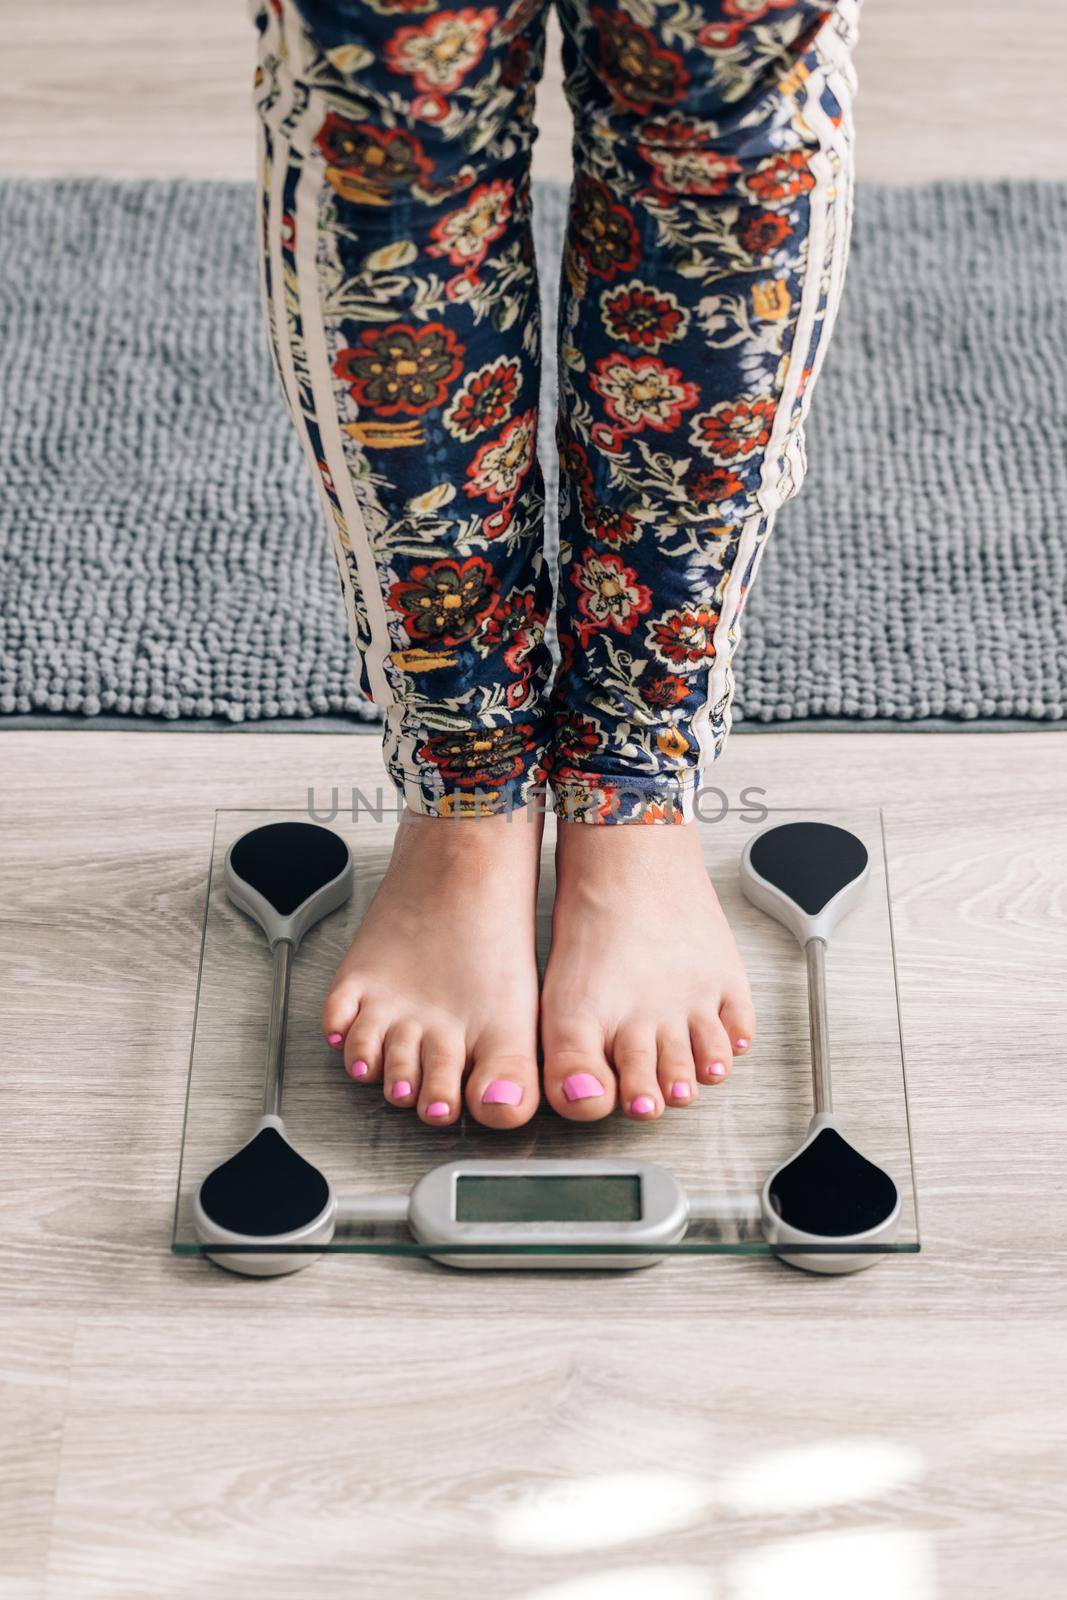 Closeup of barefoot woman using digital scales and checking her weight. Female feet step on floor scales. Concept of dieting, loosing weight and healthy lifestyle.